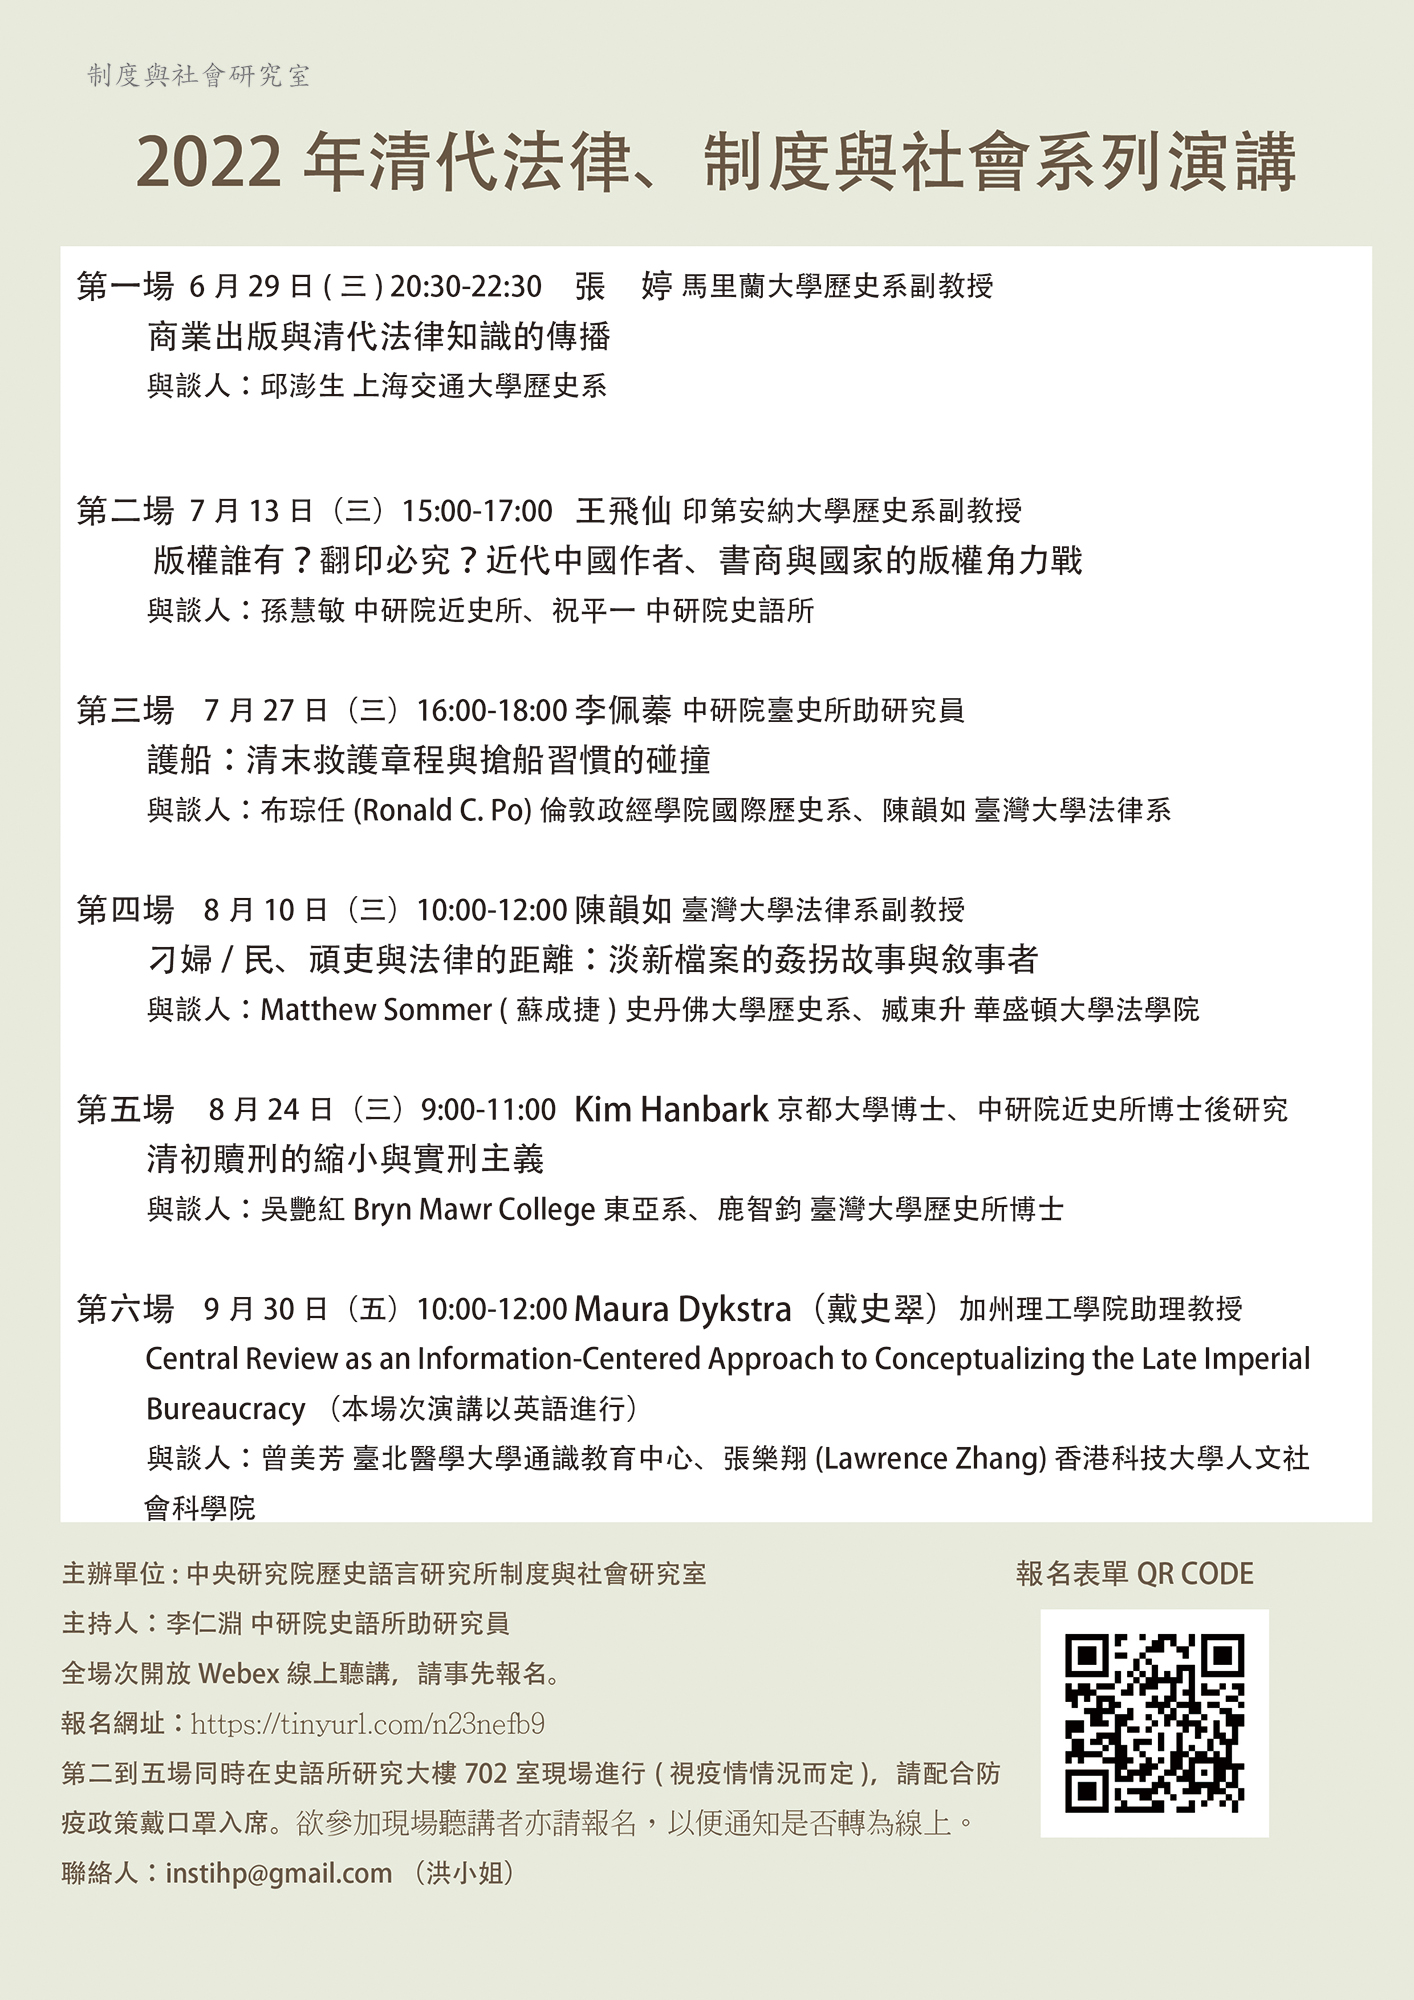 Central Review As An Information Centered Approach To Conceptualizing The Late Imperial Bureaucracy Institute Of History And Philology Academia Sinica